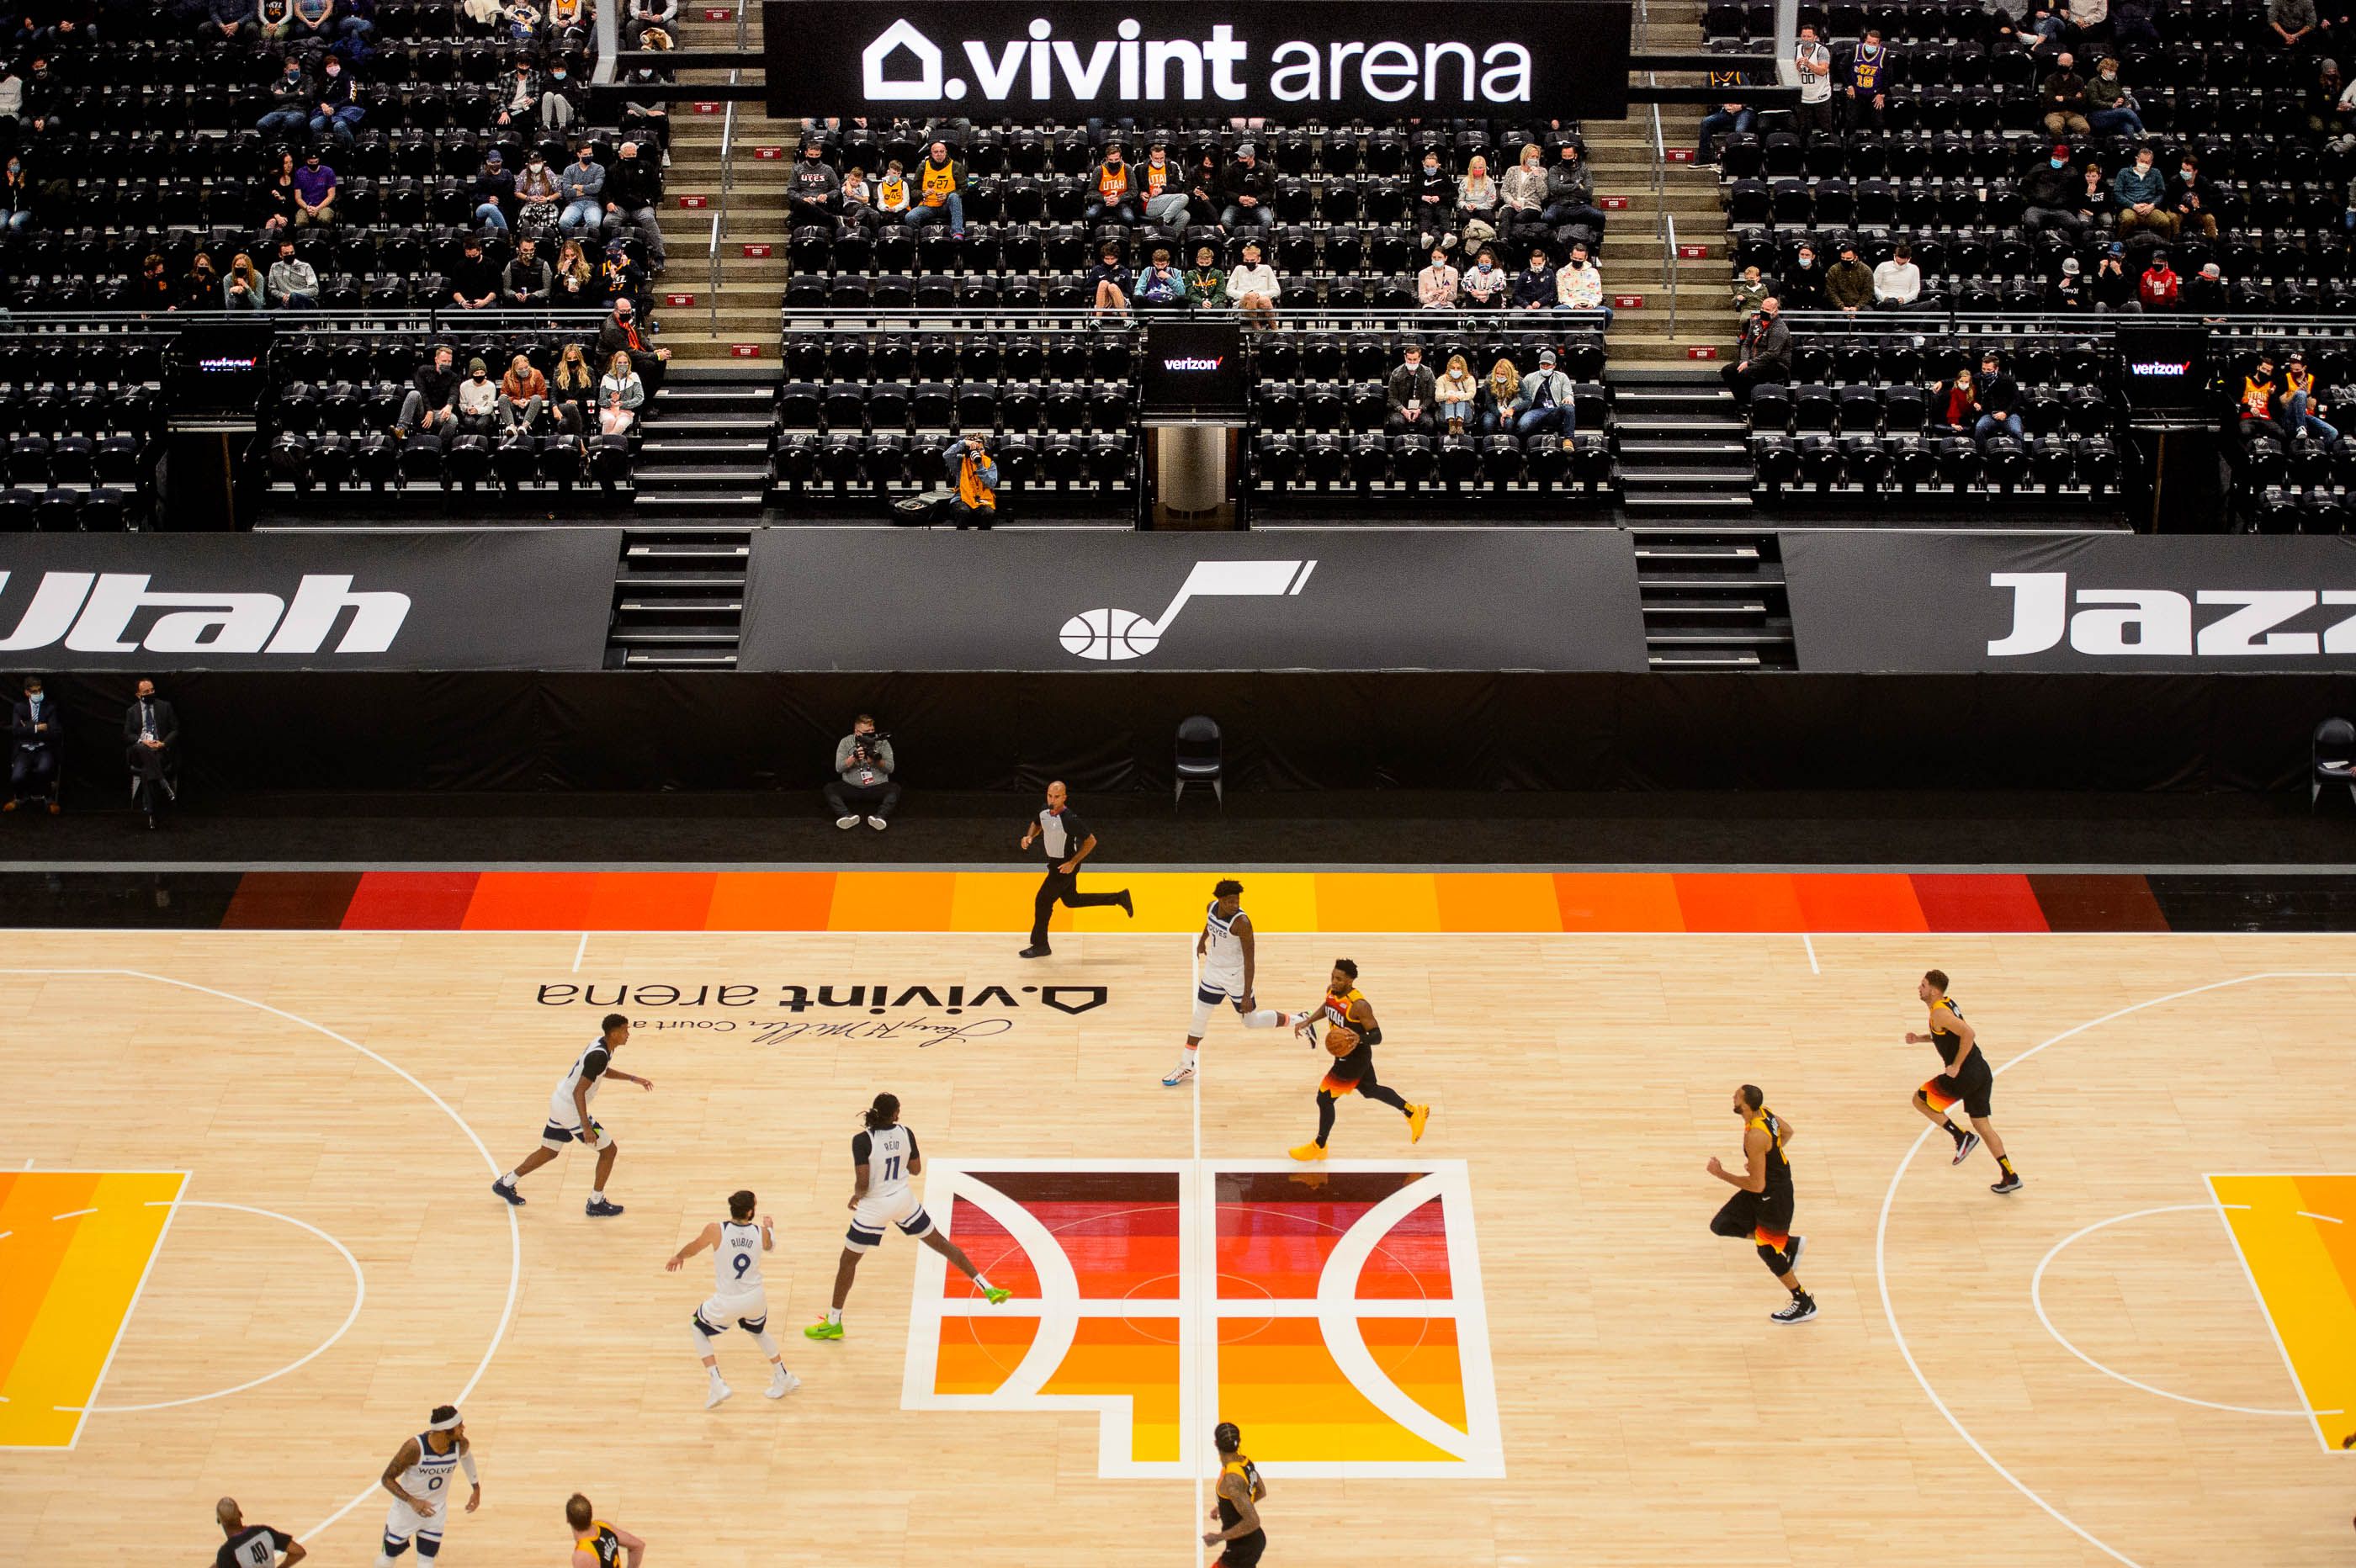 Utah Jazz Prepare Vivint Arena With Whiteout Shirts For Game One